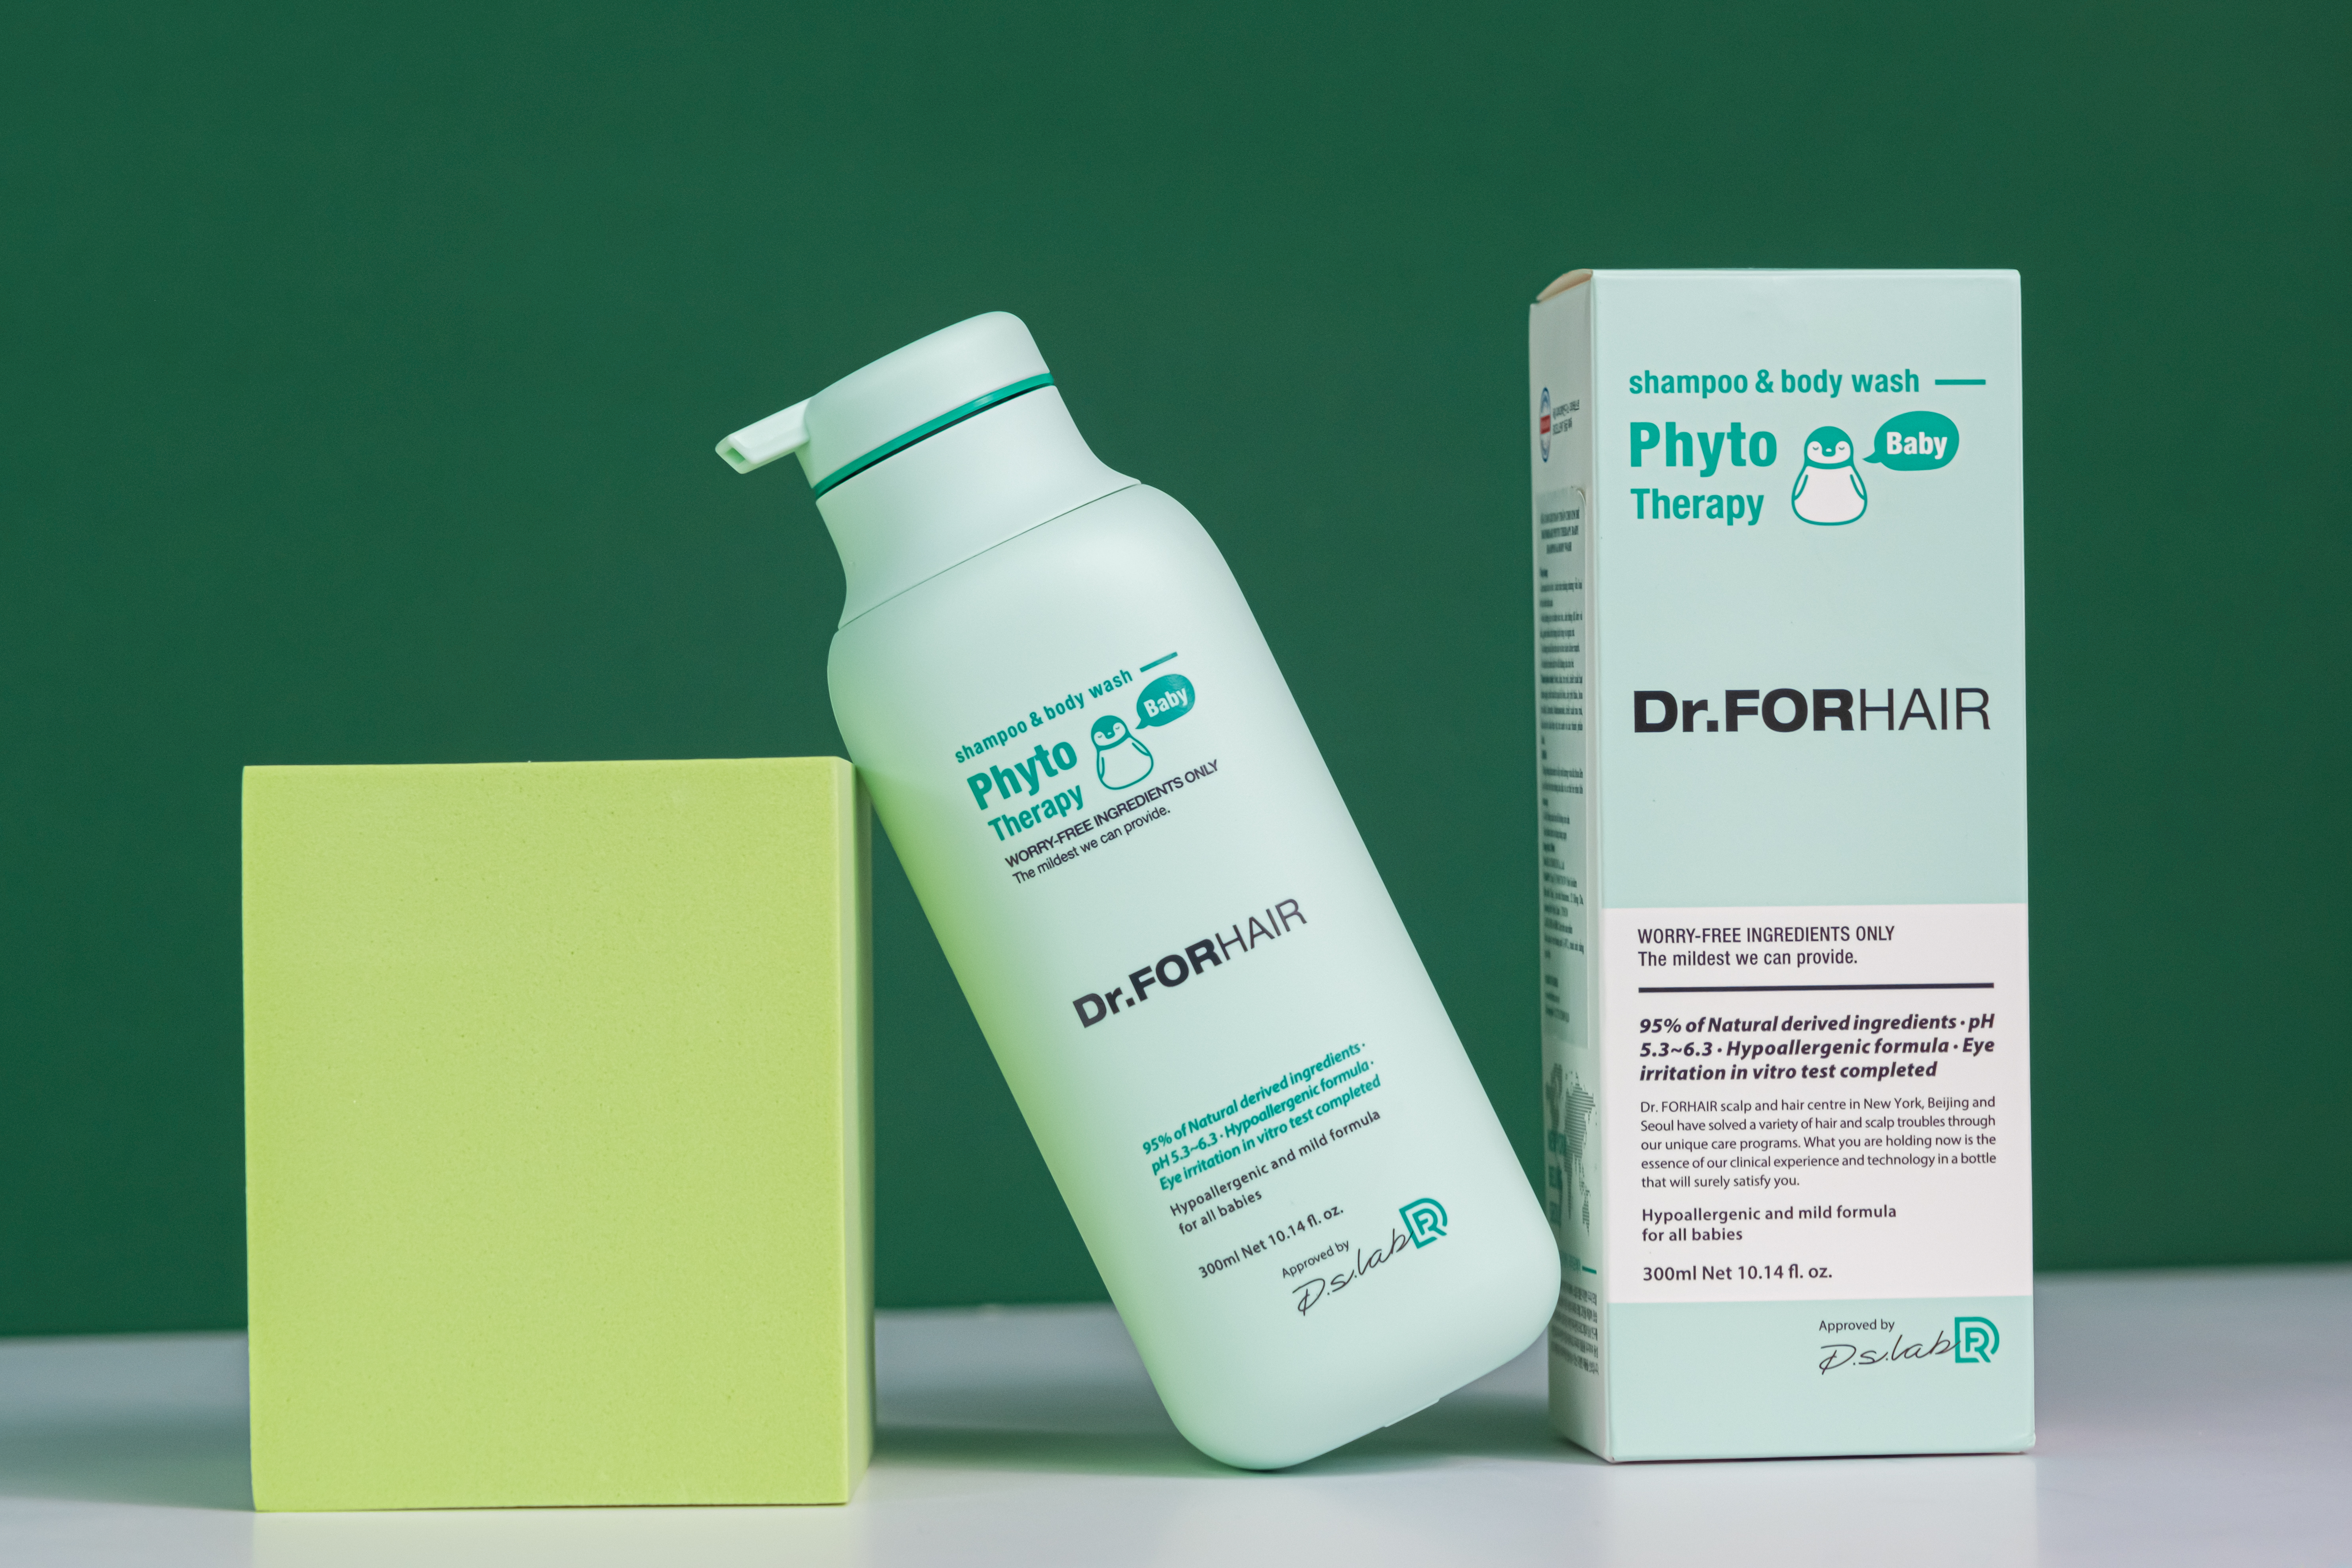 Dr.FORHAIR Phyto Therapy Baby Shampoo & Body Wash